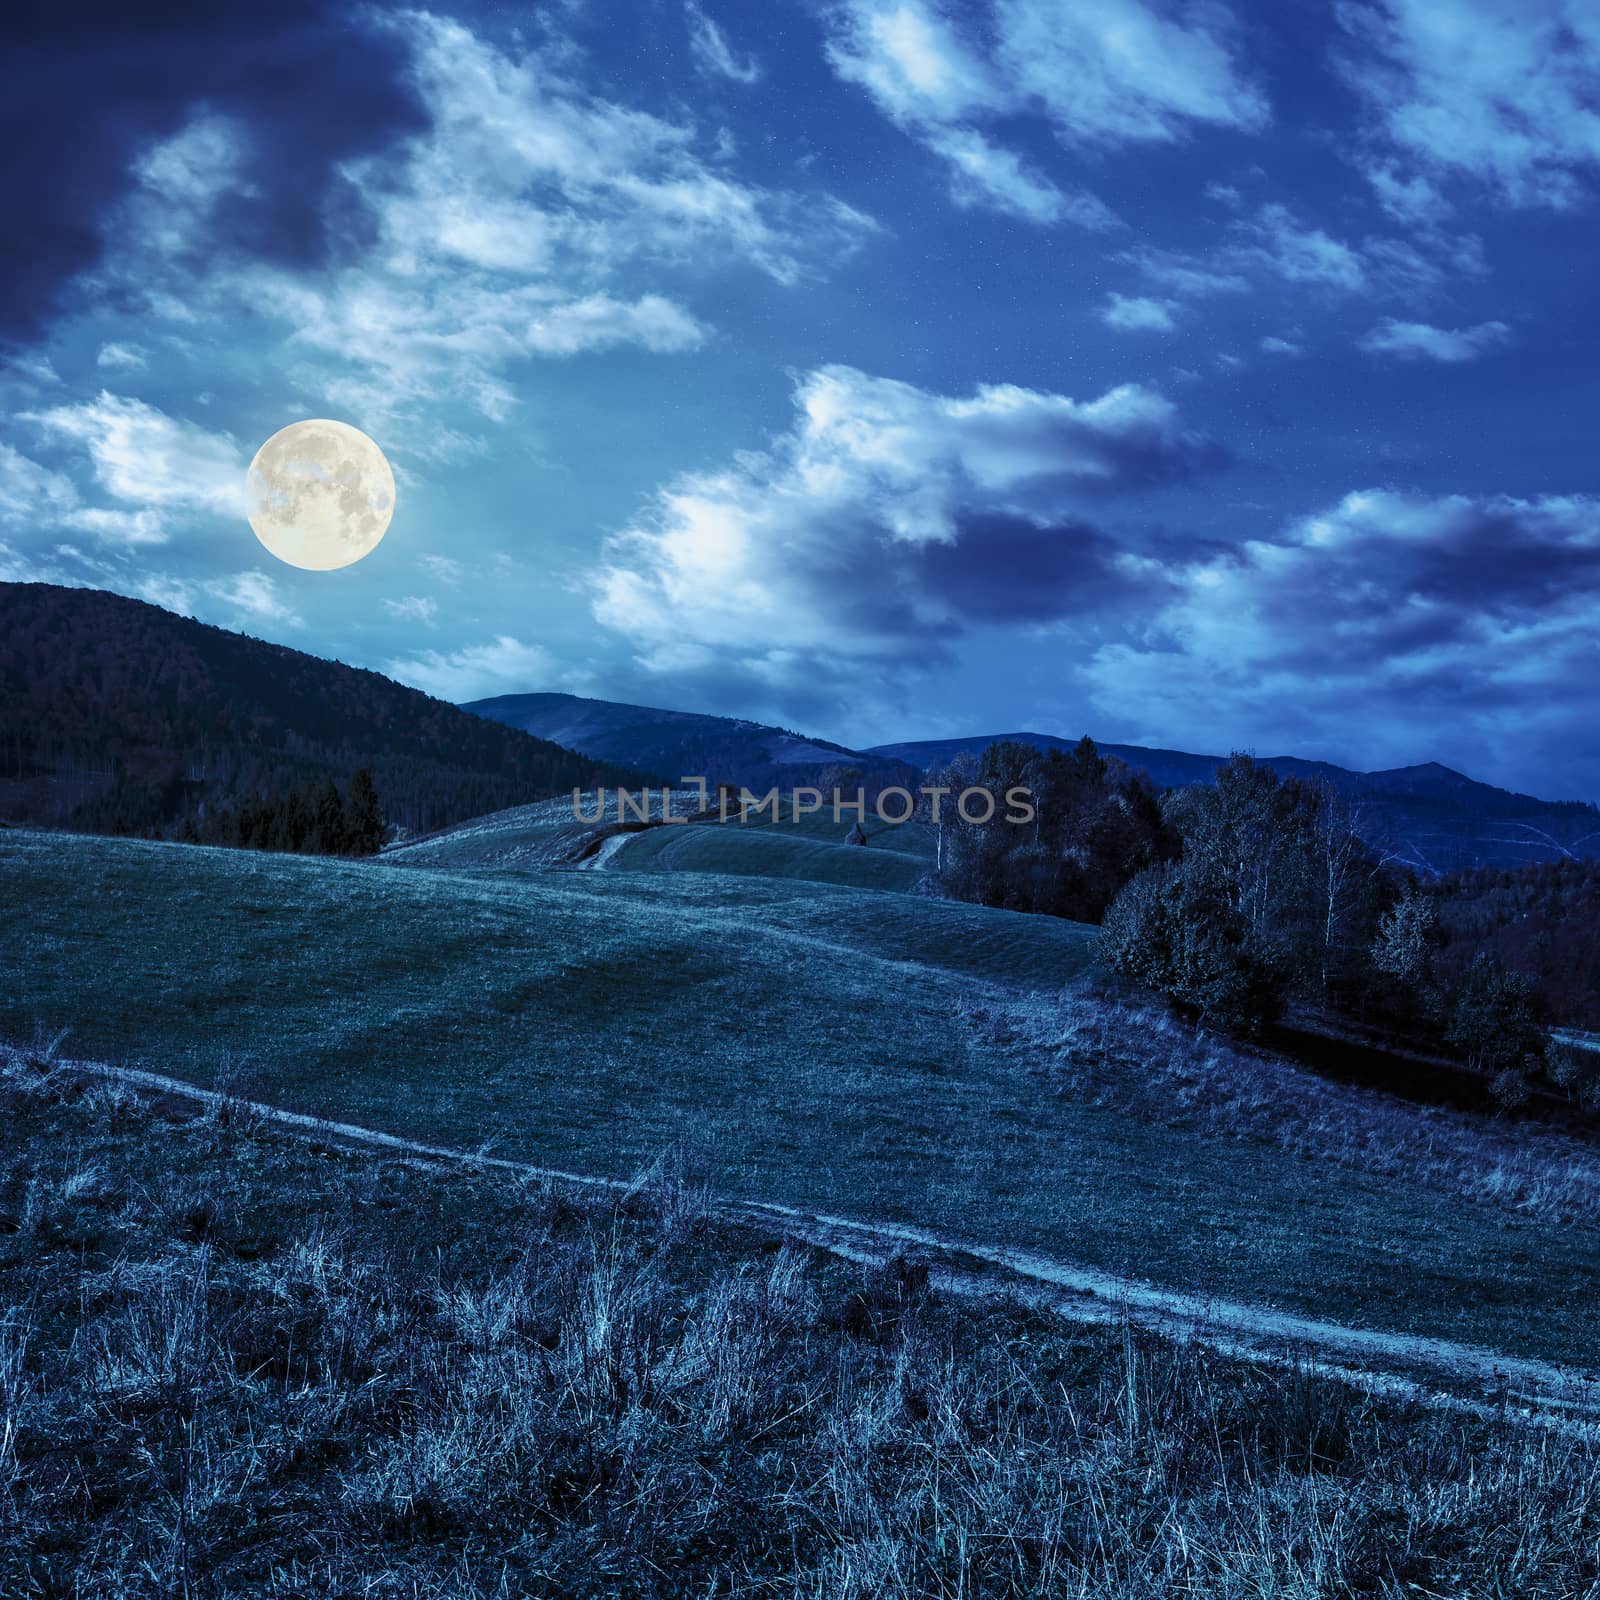 trees on autumn meadow in mountains at night by Pellinni